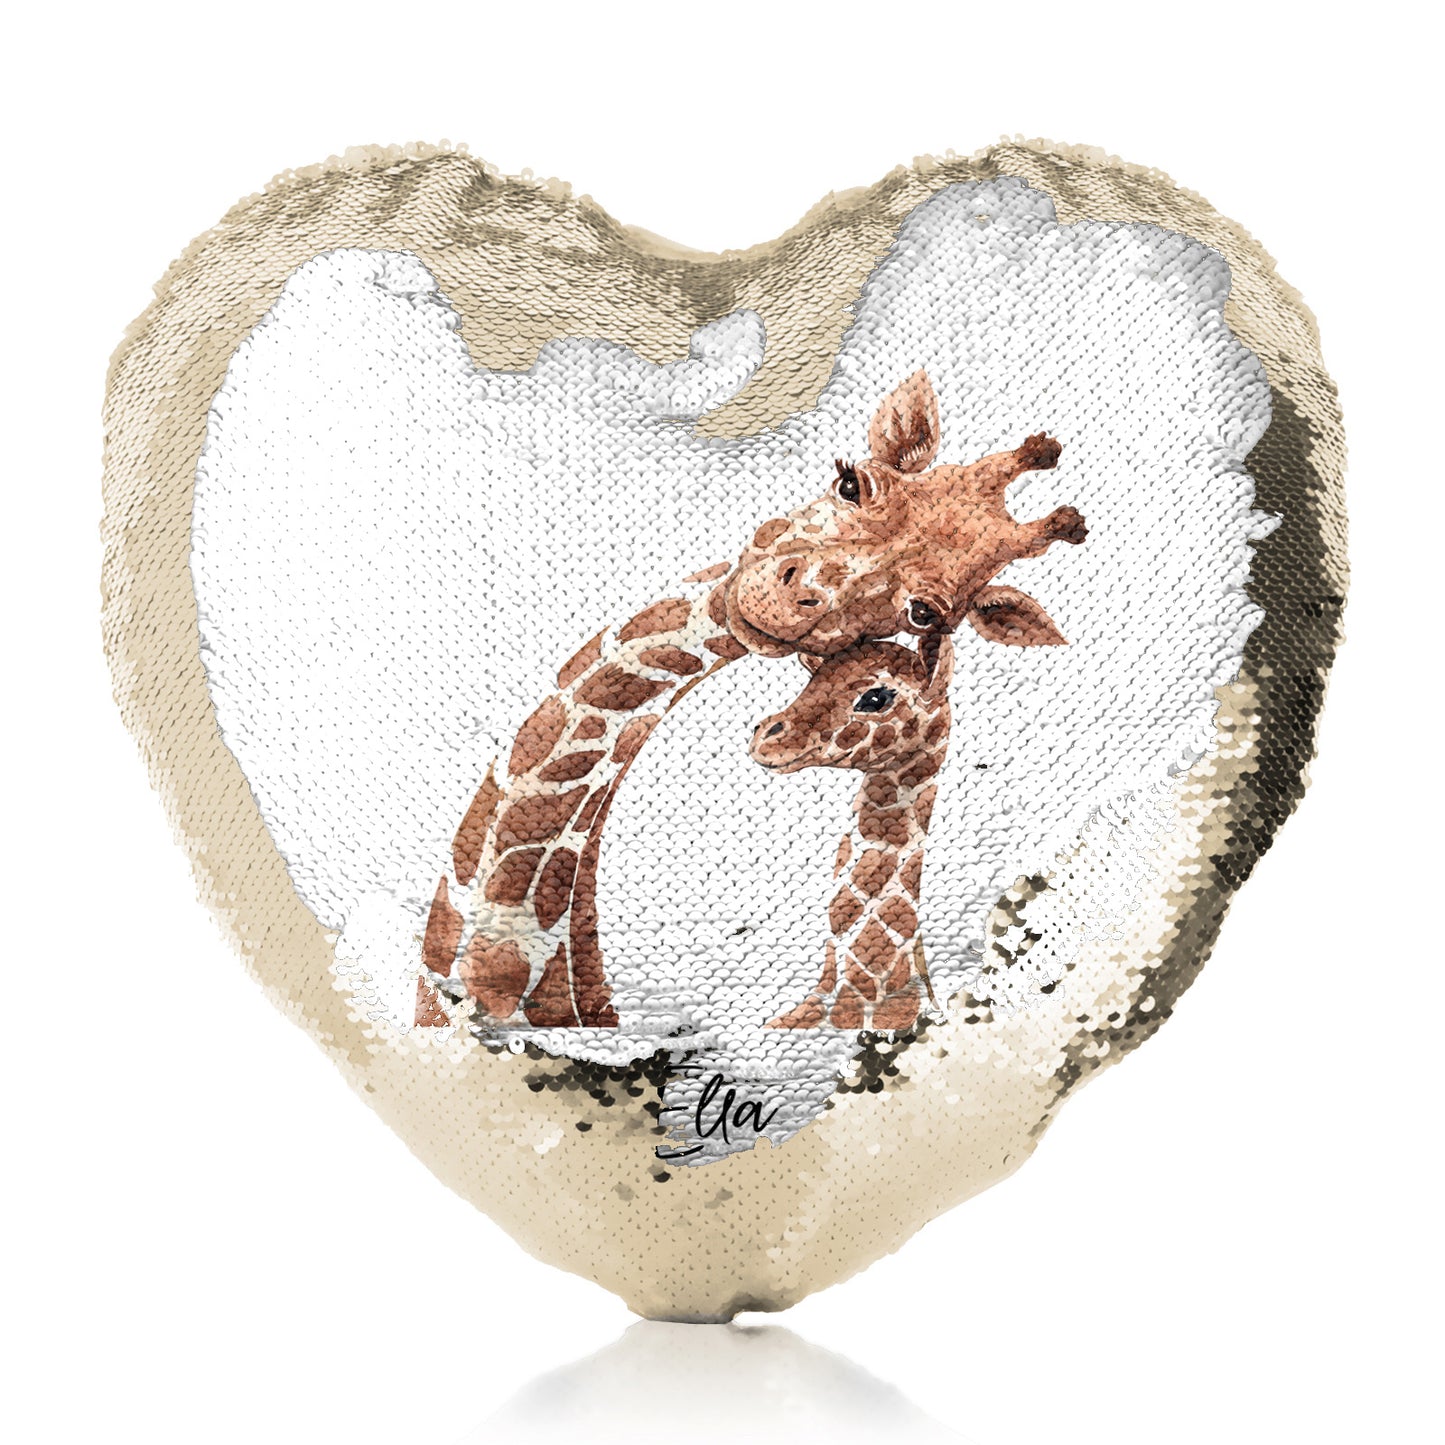 Personalised Sequin Heart Cushion with Welcoming Text and Relaxing Mum and Baby Giraffes